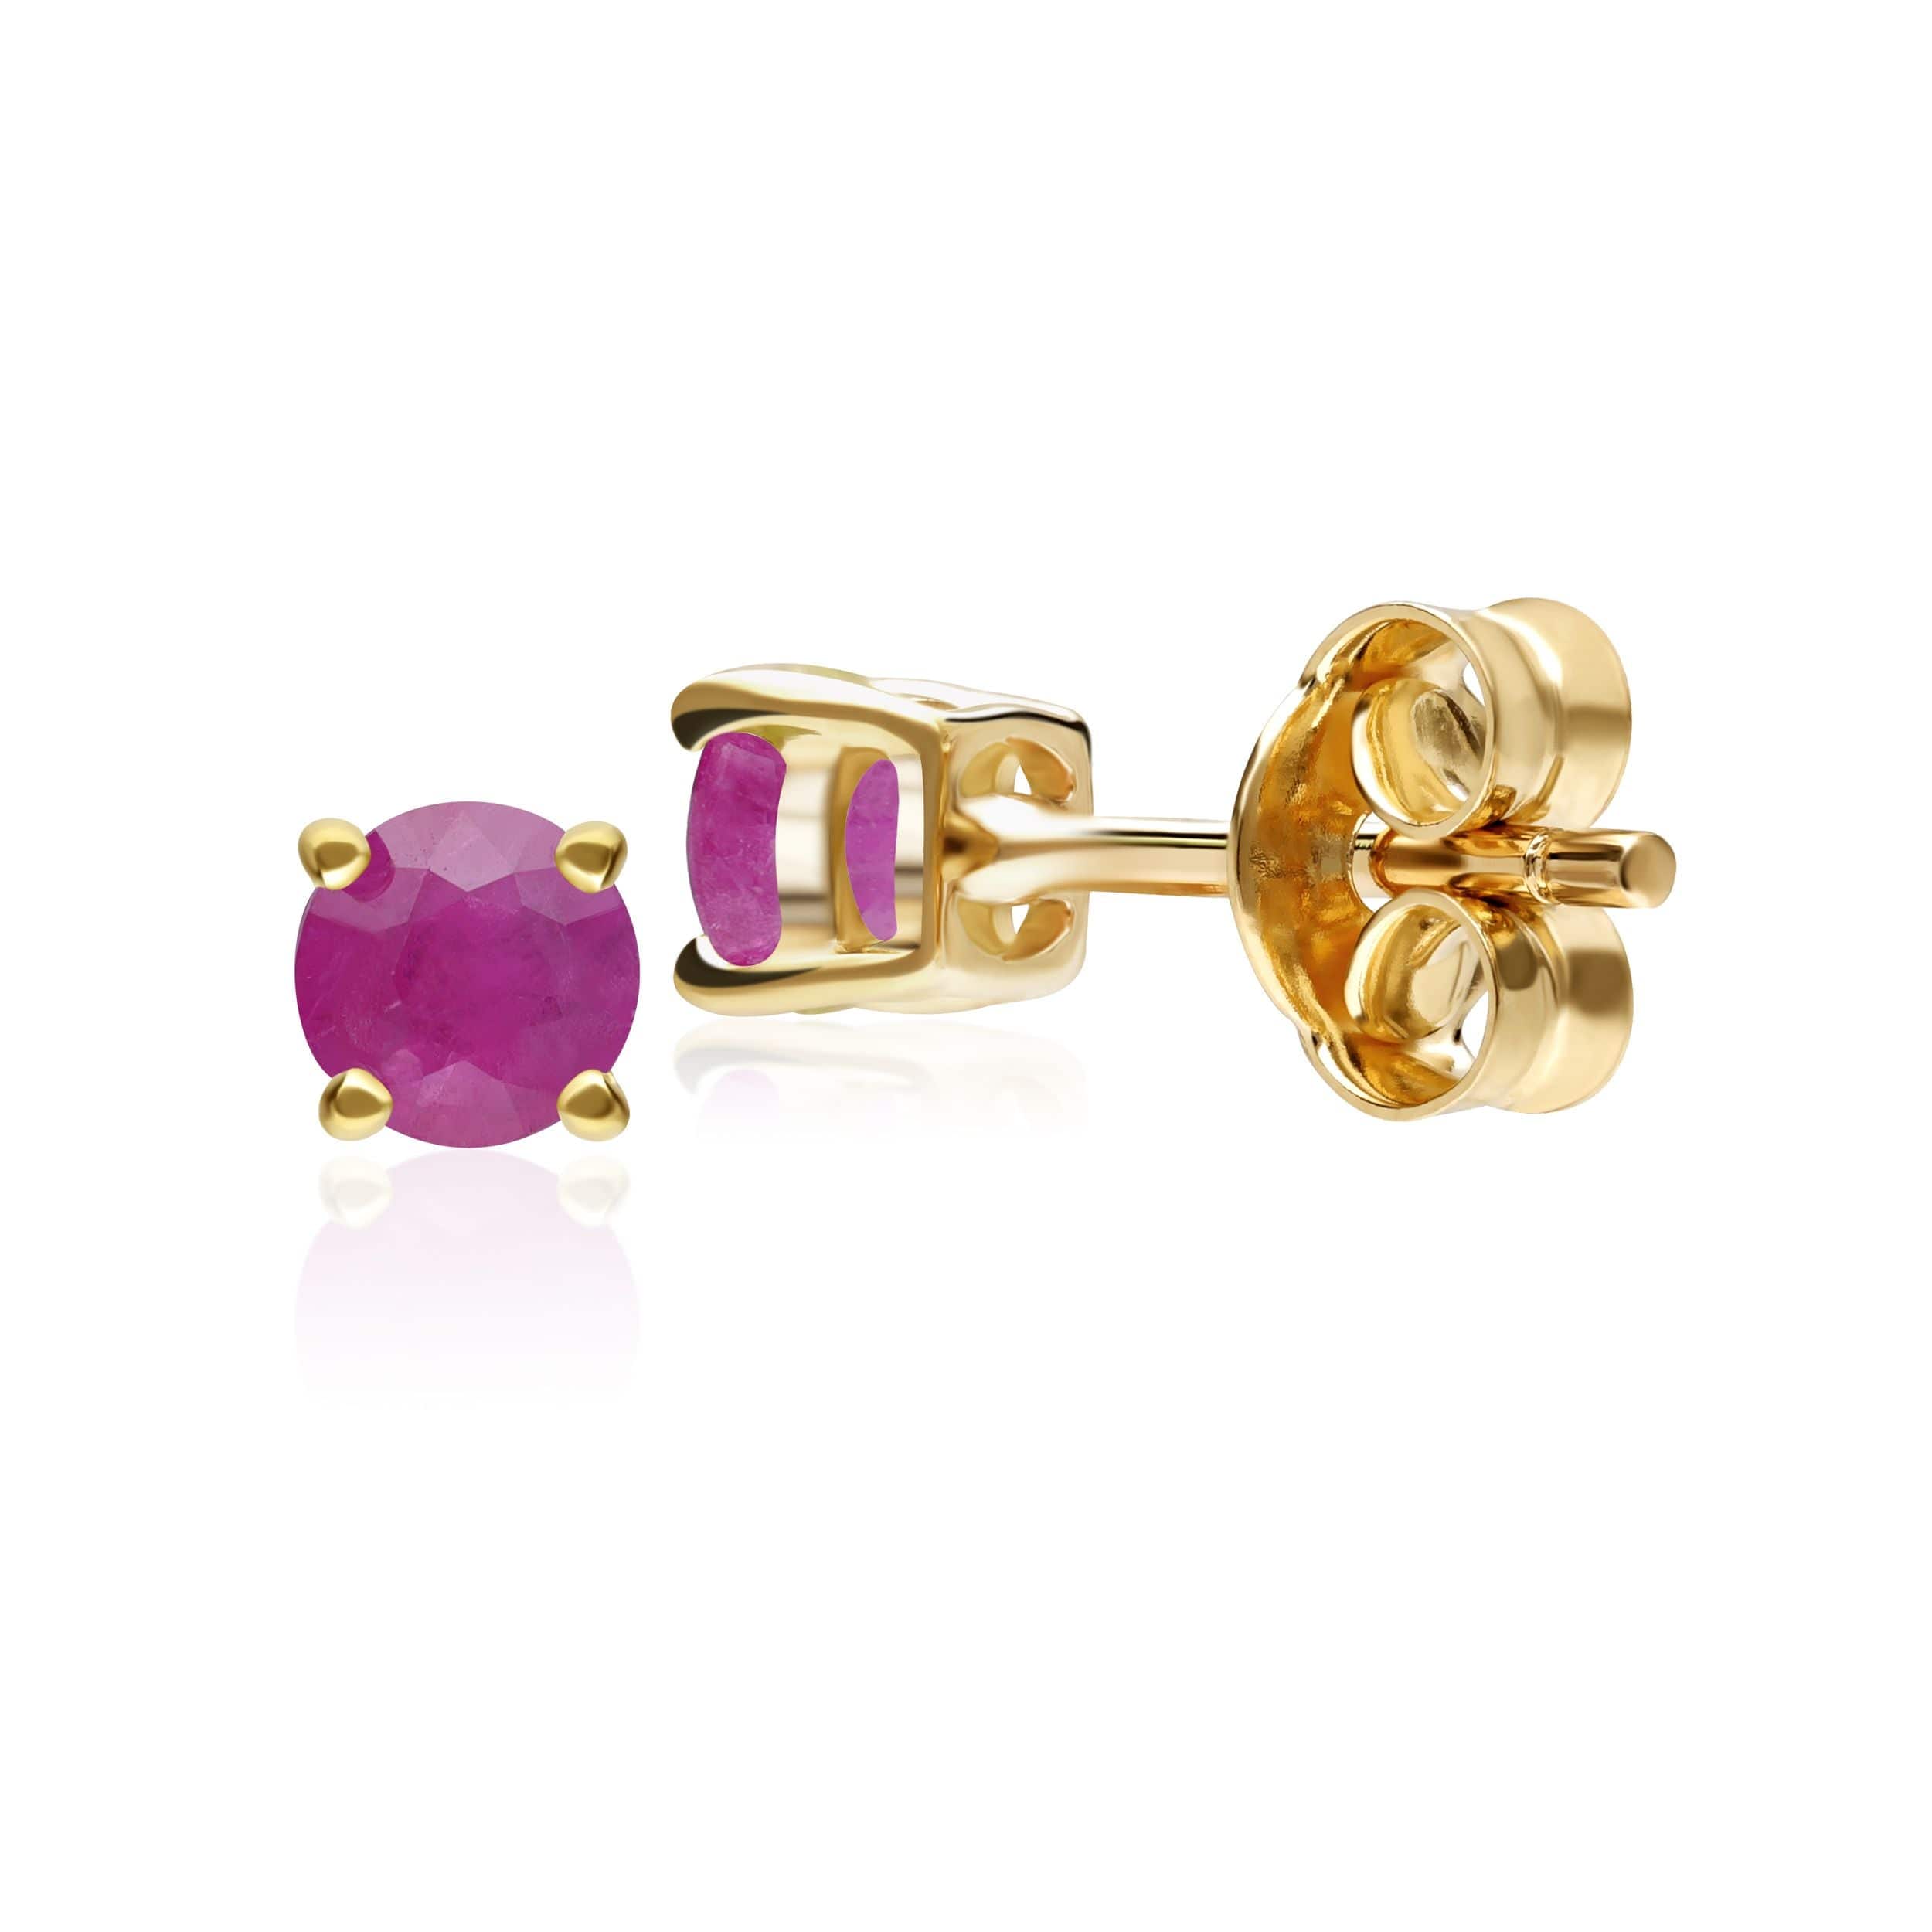 Classic Round Ruby Checkerboard Stud Earrings in 9ct Gold - Gemondo